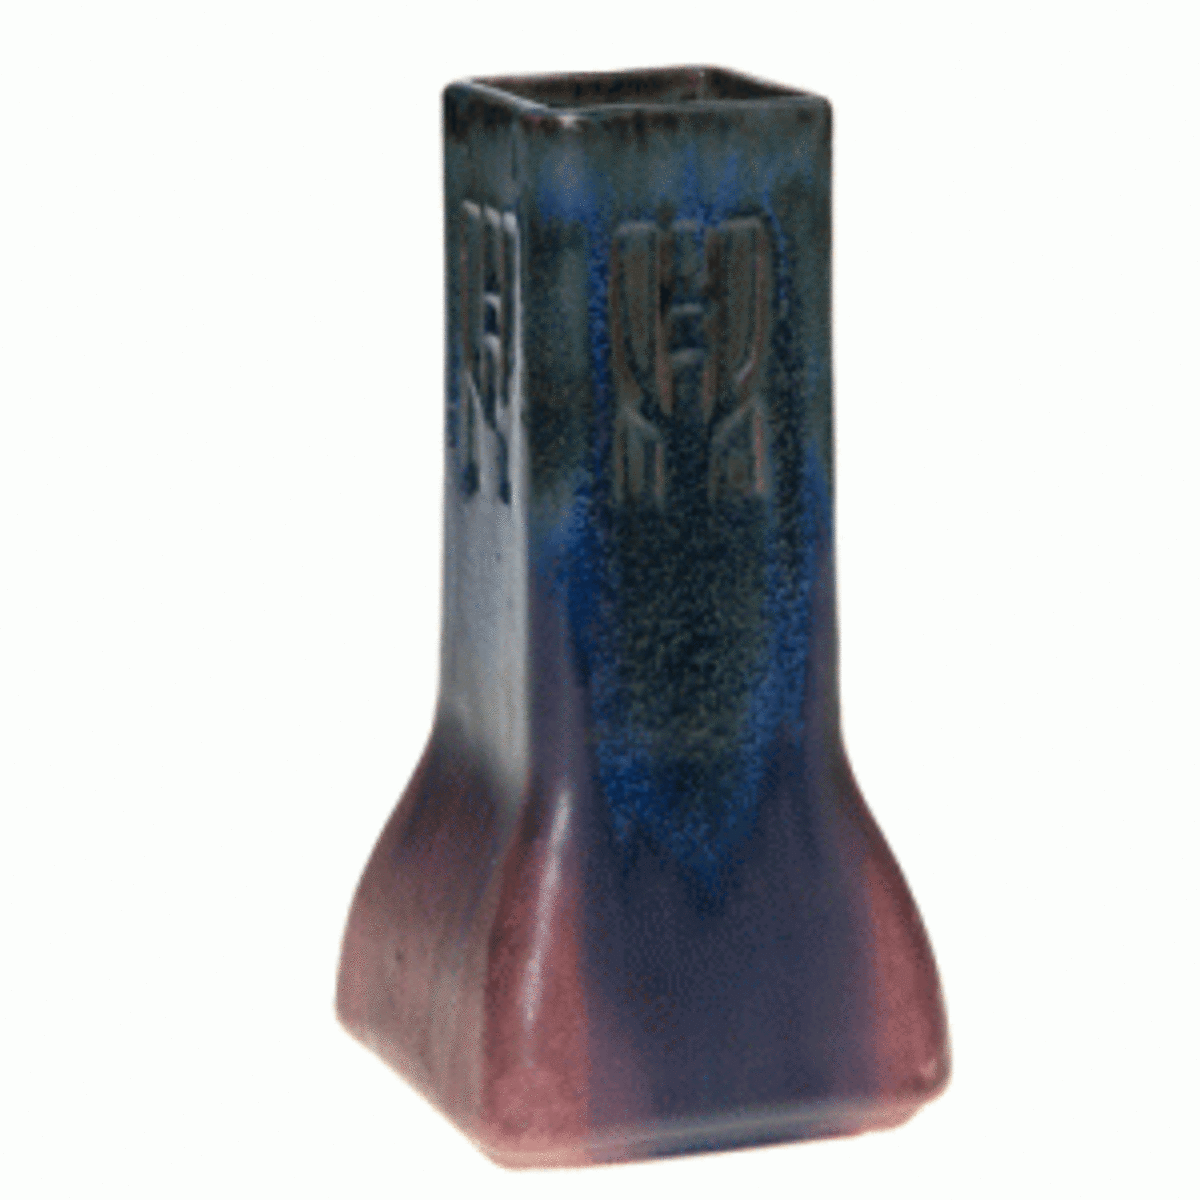 Early Fulper square tapering vase done in black over a crystalline blue over wistaria glazes. Marked with the early rectangular Fulper ink stamp logo and the letter “D.” Height 8 inches. $550. Photo courtesy Mark Mussio, Humler & Nolan